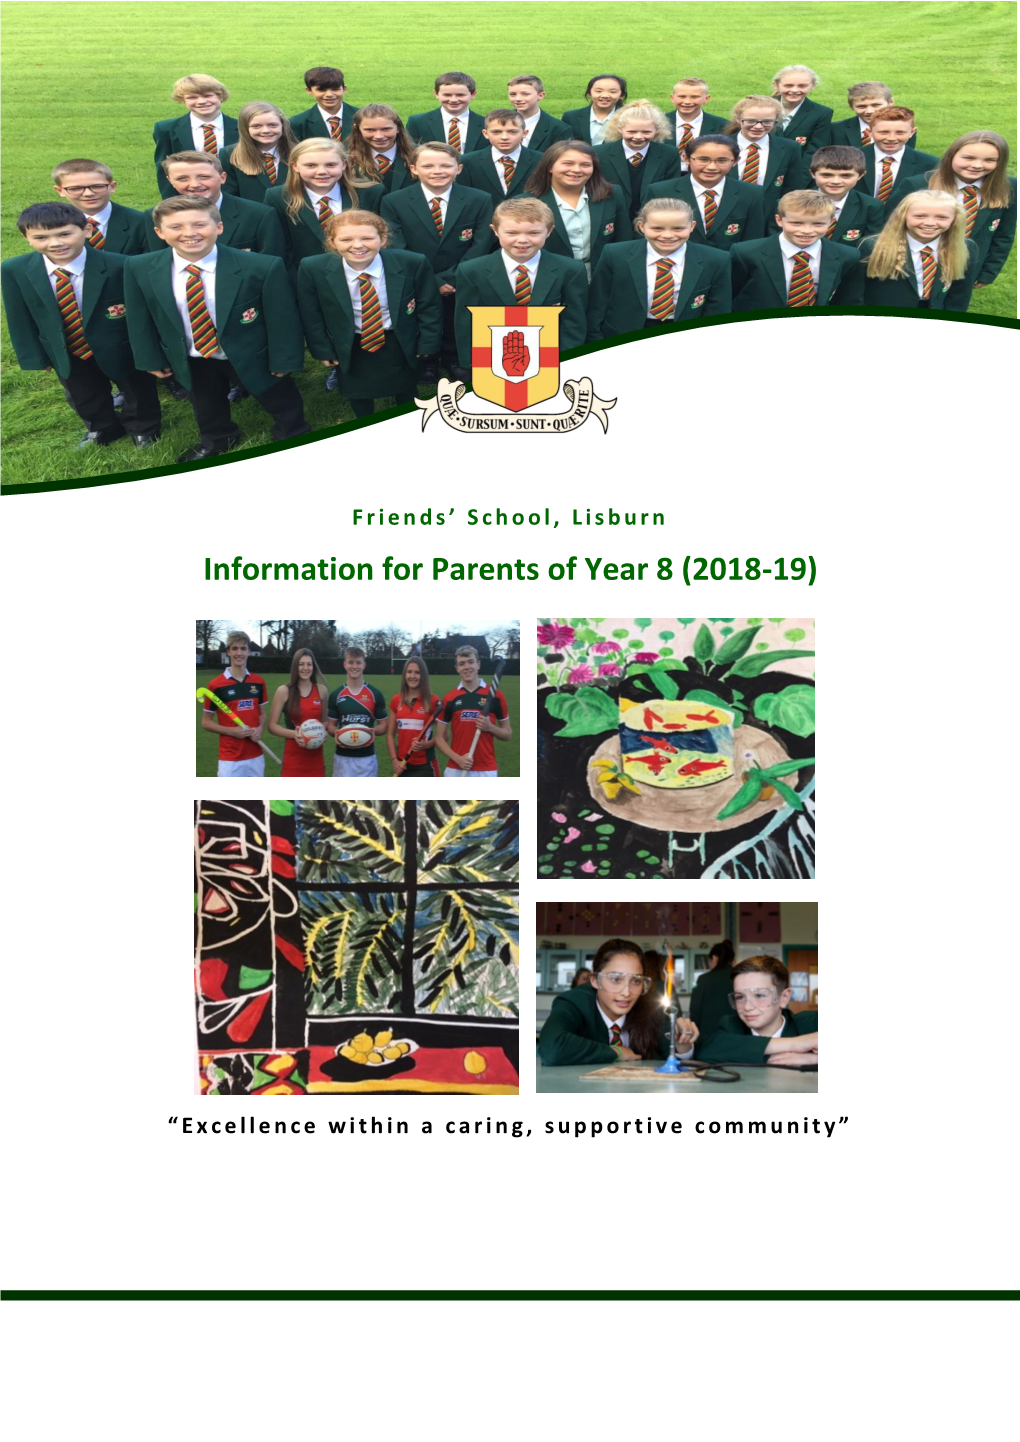 Information for Parents of Year 8 (2018-19)